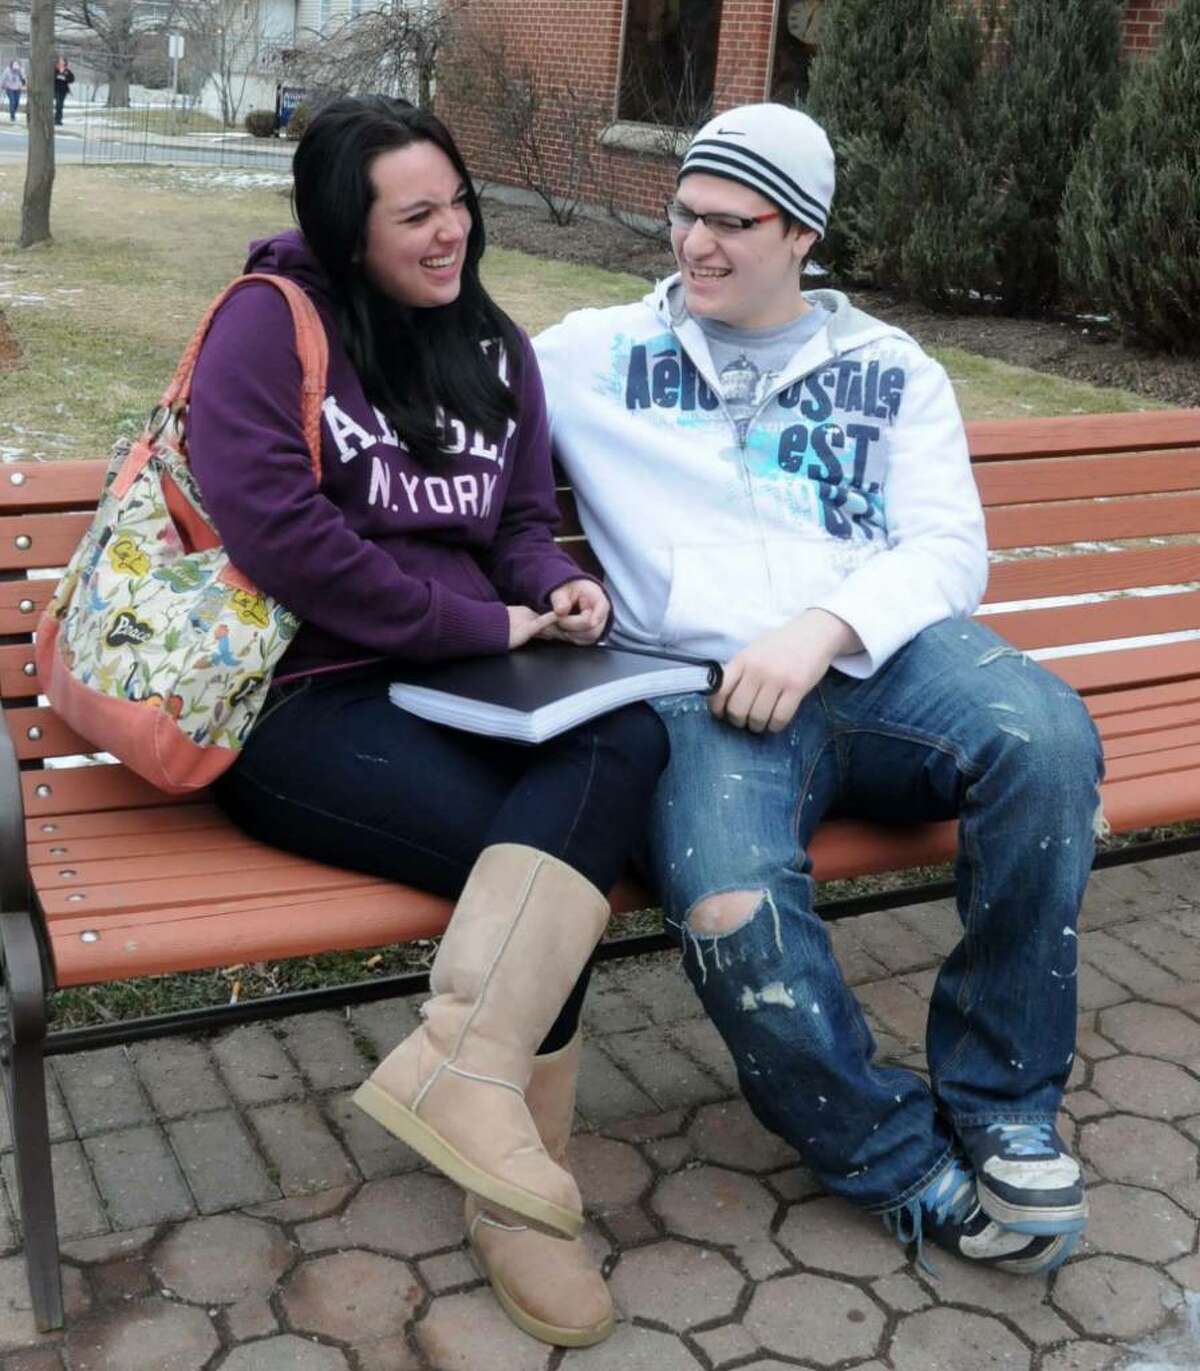 Alysha Cloutier, left, 19 of Danbury, and her boyfriend of almost a year, Mark Santaromita, 18, of Danbury spend time together after Cloutier is finished with her classes for the day on Tuesday, Feb. 2, 2010. Cloutier is a student at Western Connecticut State University in Danbury.